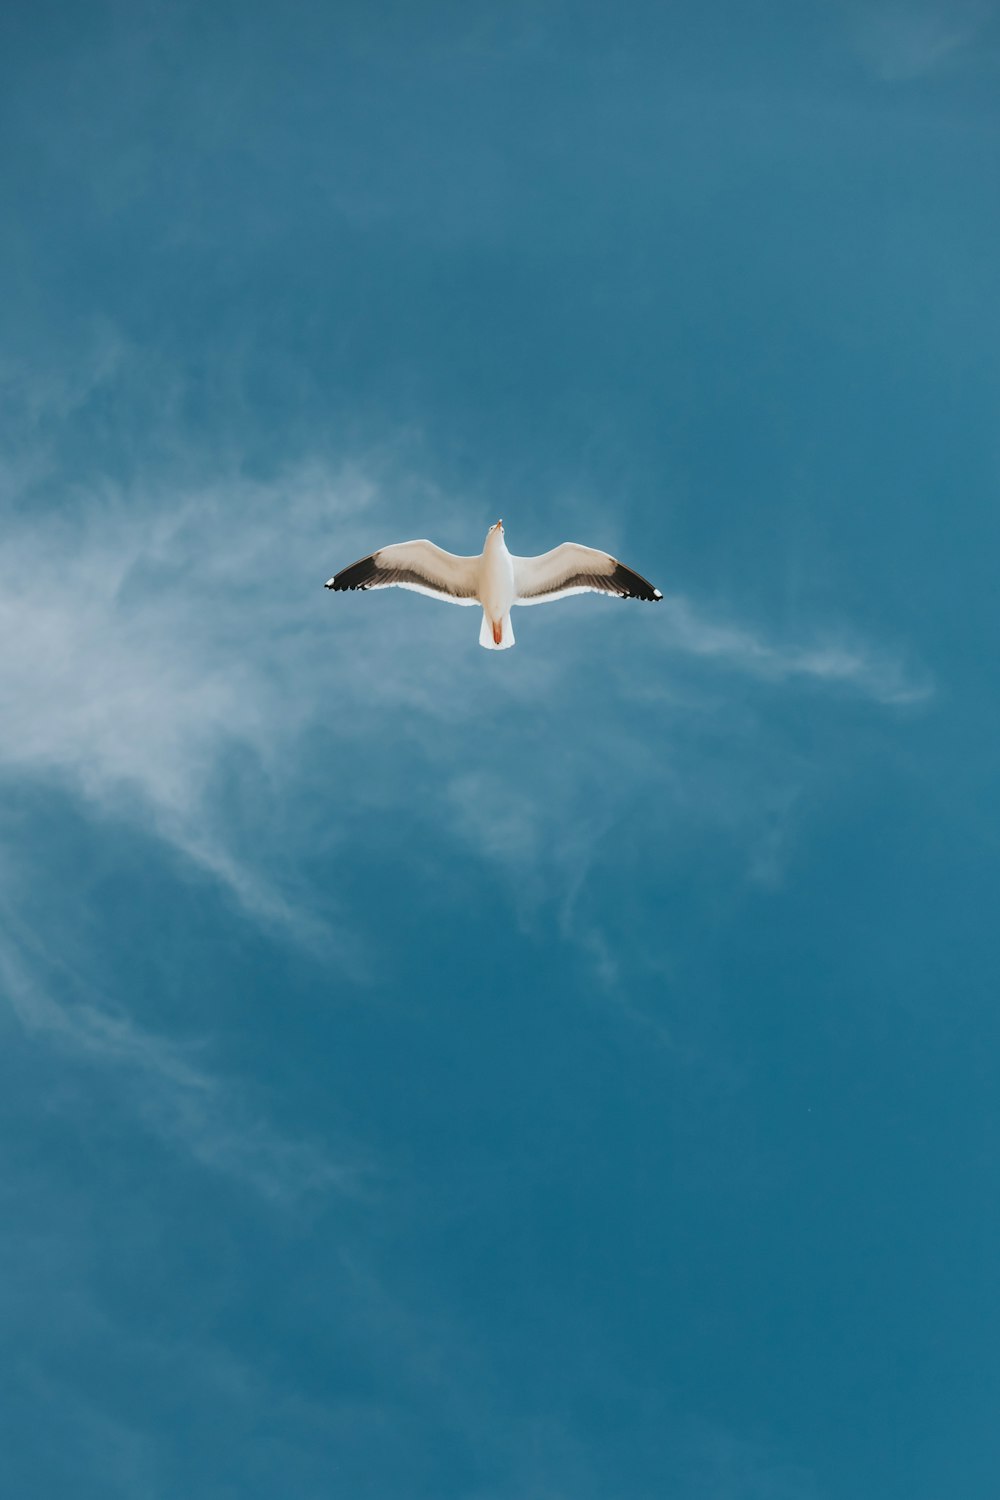 500+ Flying Bird Pictures | Download Free Images on Unsplash